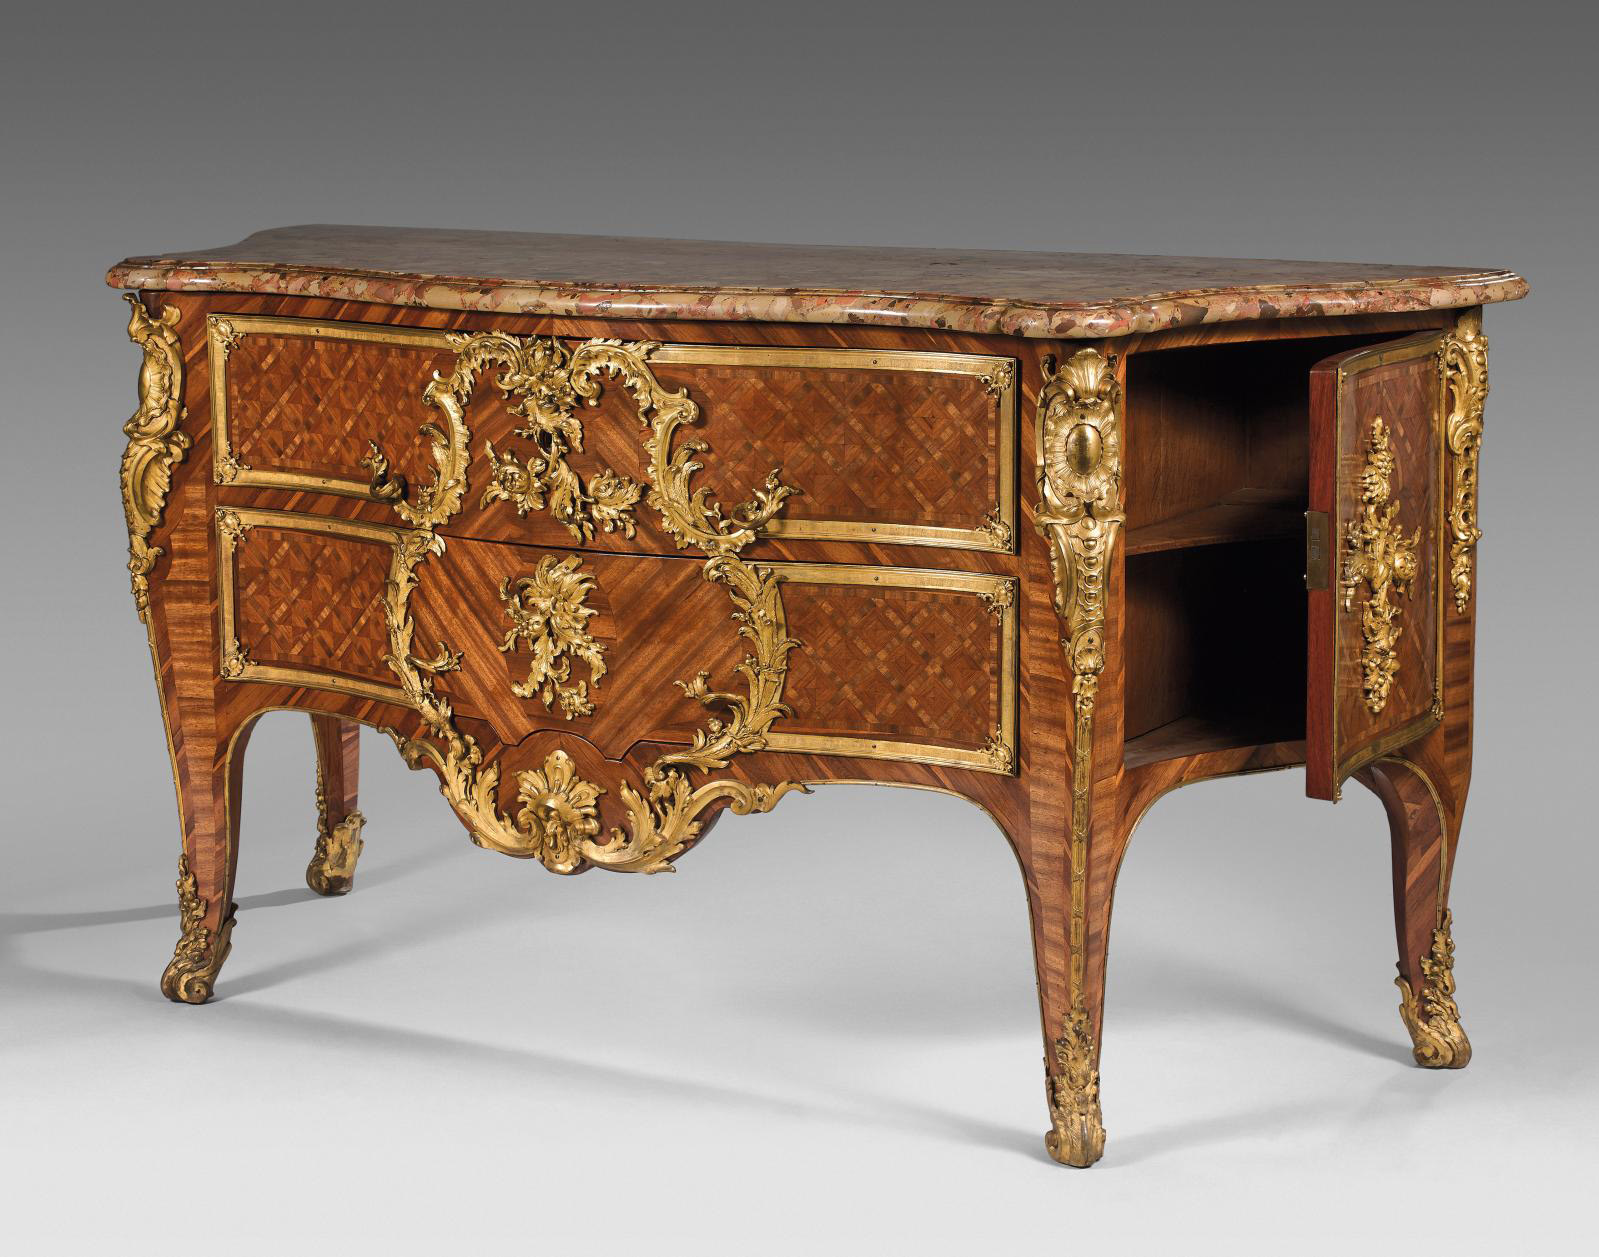 The Excellence of 18th-Century Furniture According to Mathieu Criaerd 